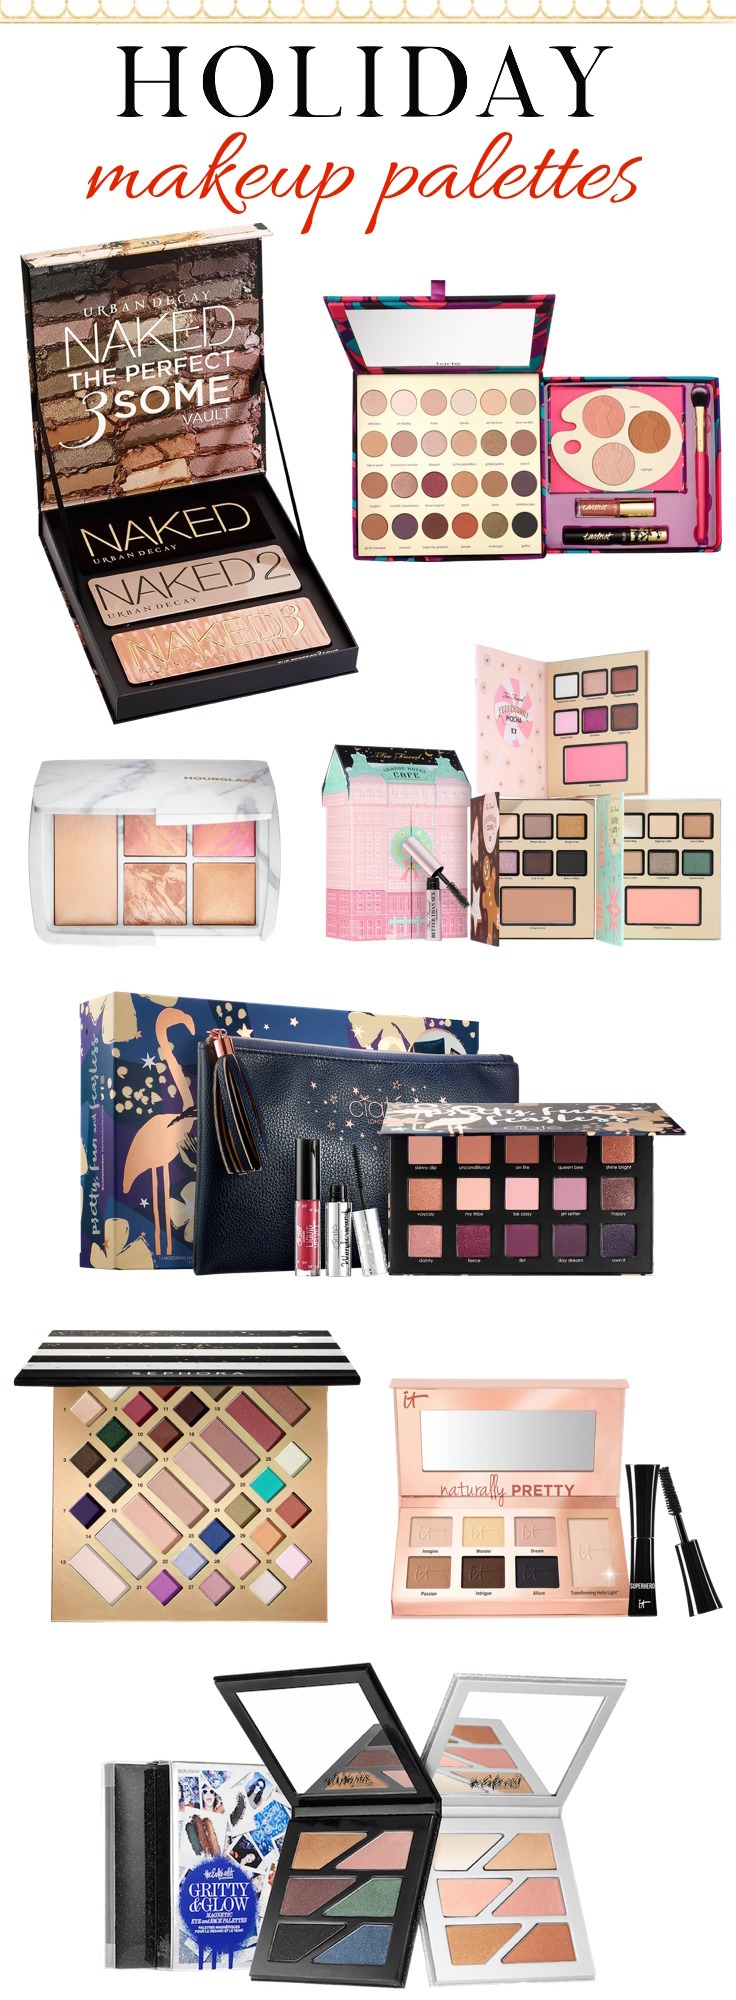 The prettiest holiday'16 makeup palettes you need to snap up this season! Click through to see the list!